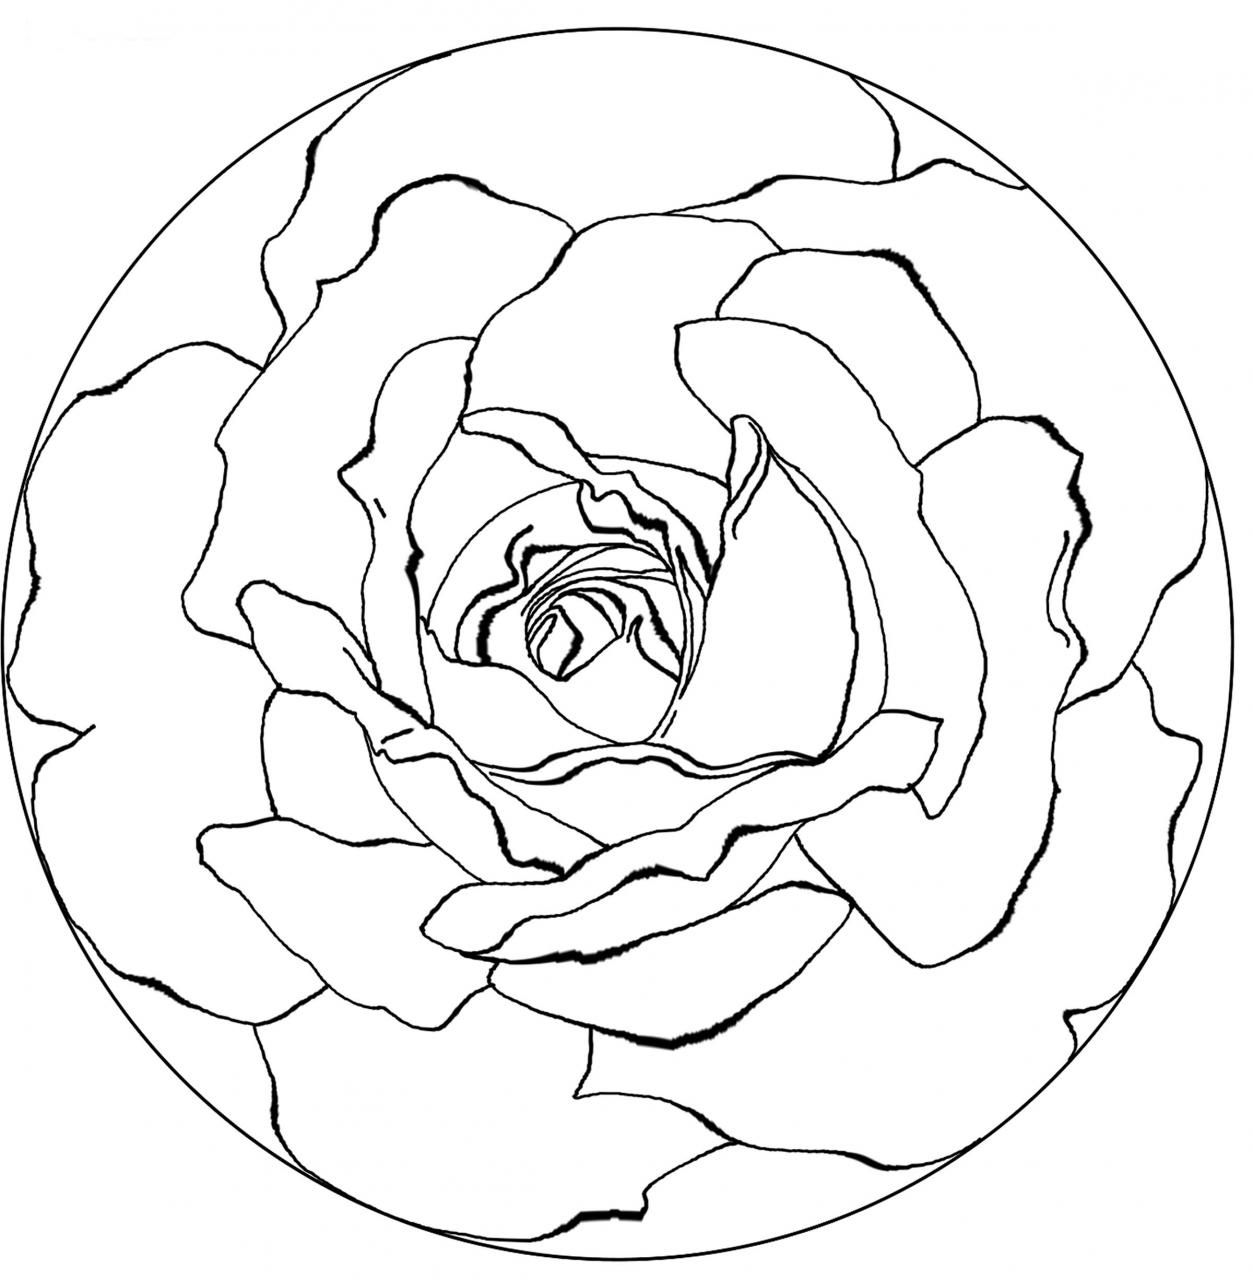 Free Printable Rose Mandala Coloring Pages Coloring Page For Kids ...